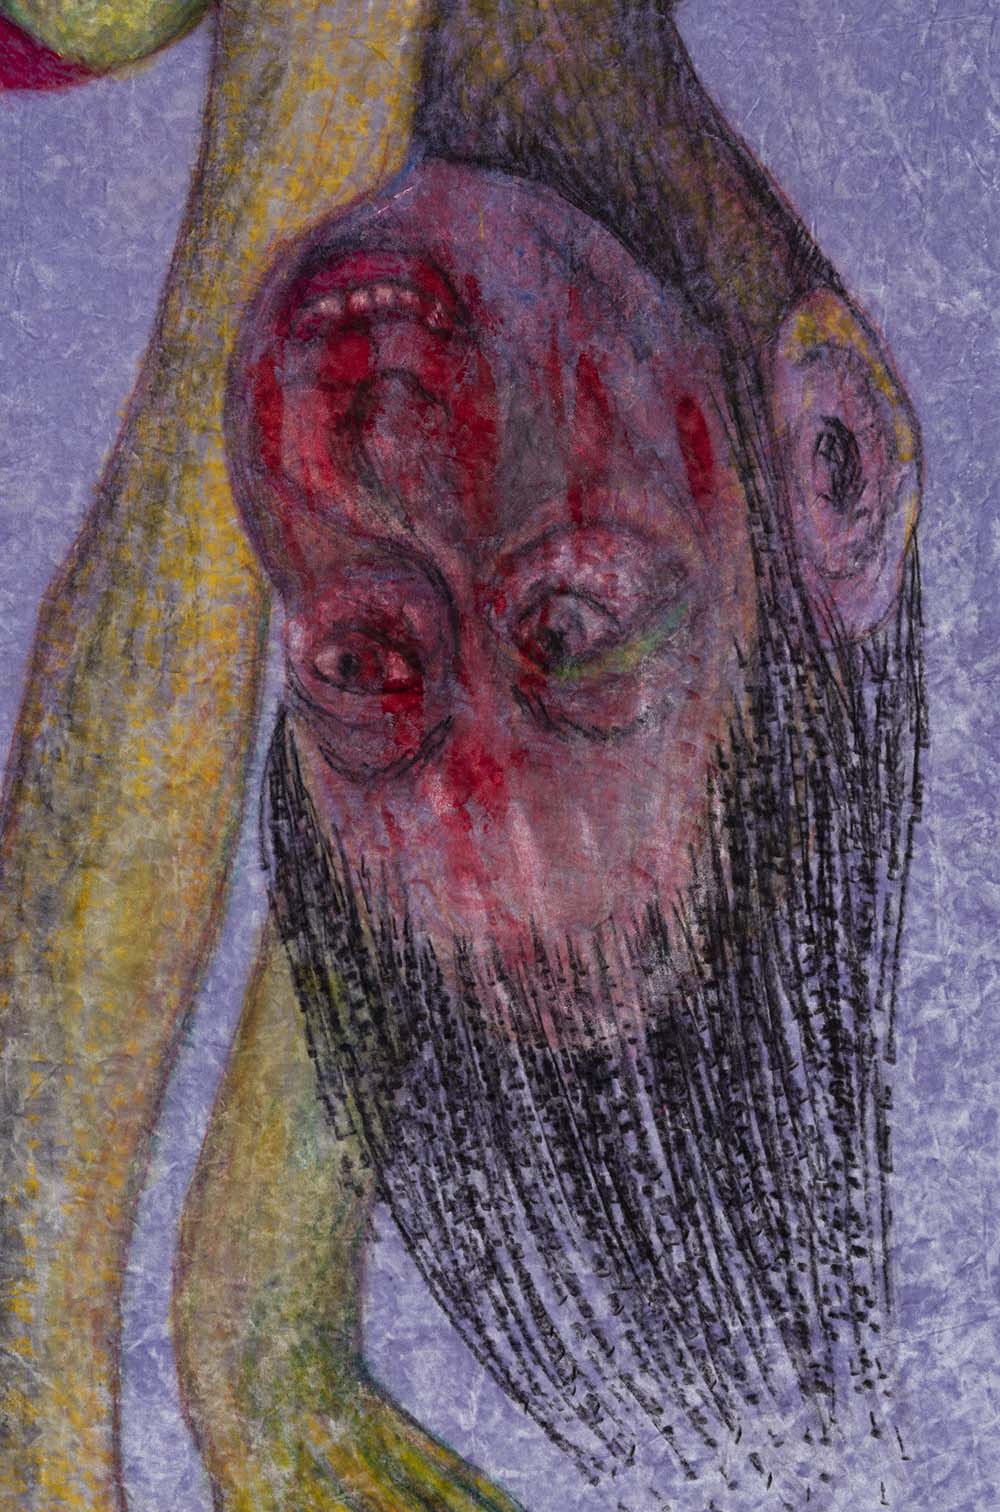 <em>Candice</em>, 2017. Oil pastel and acrylic on crushed velvet, 97 1/4 x 54 1/2 inches. Detail